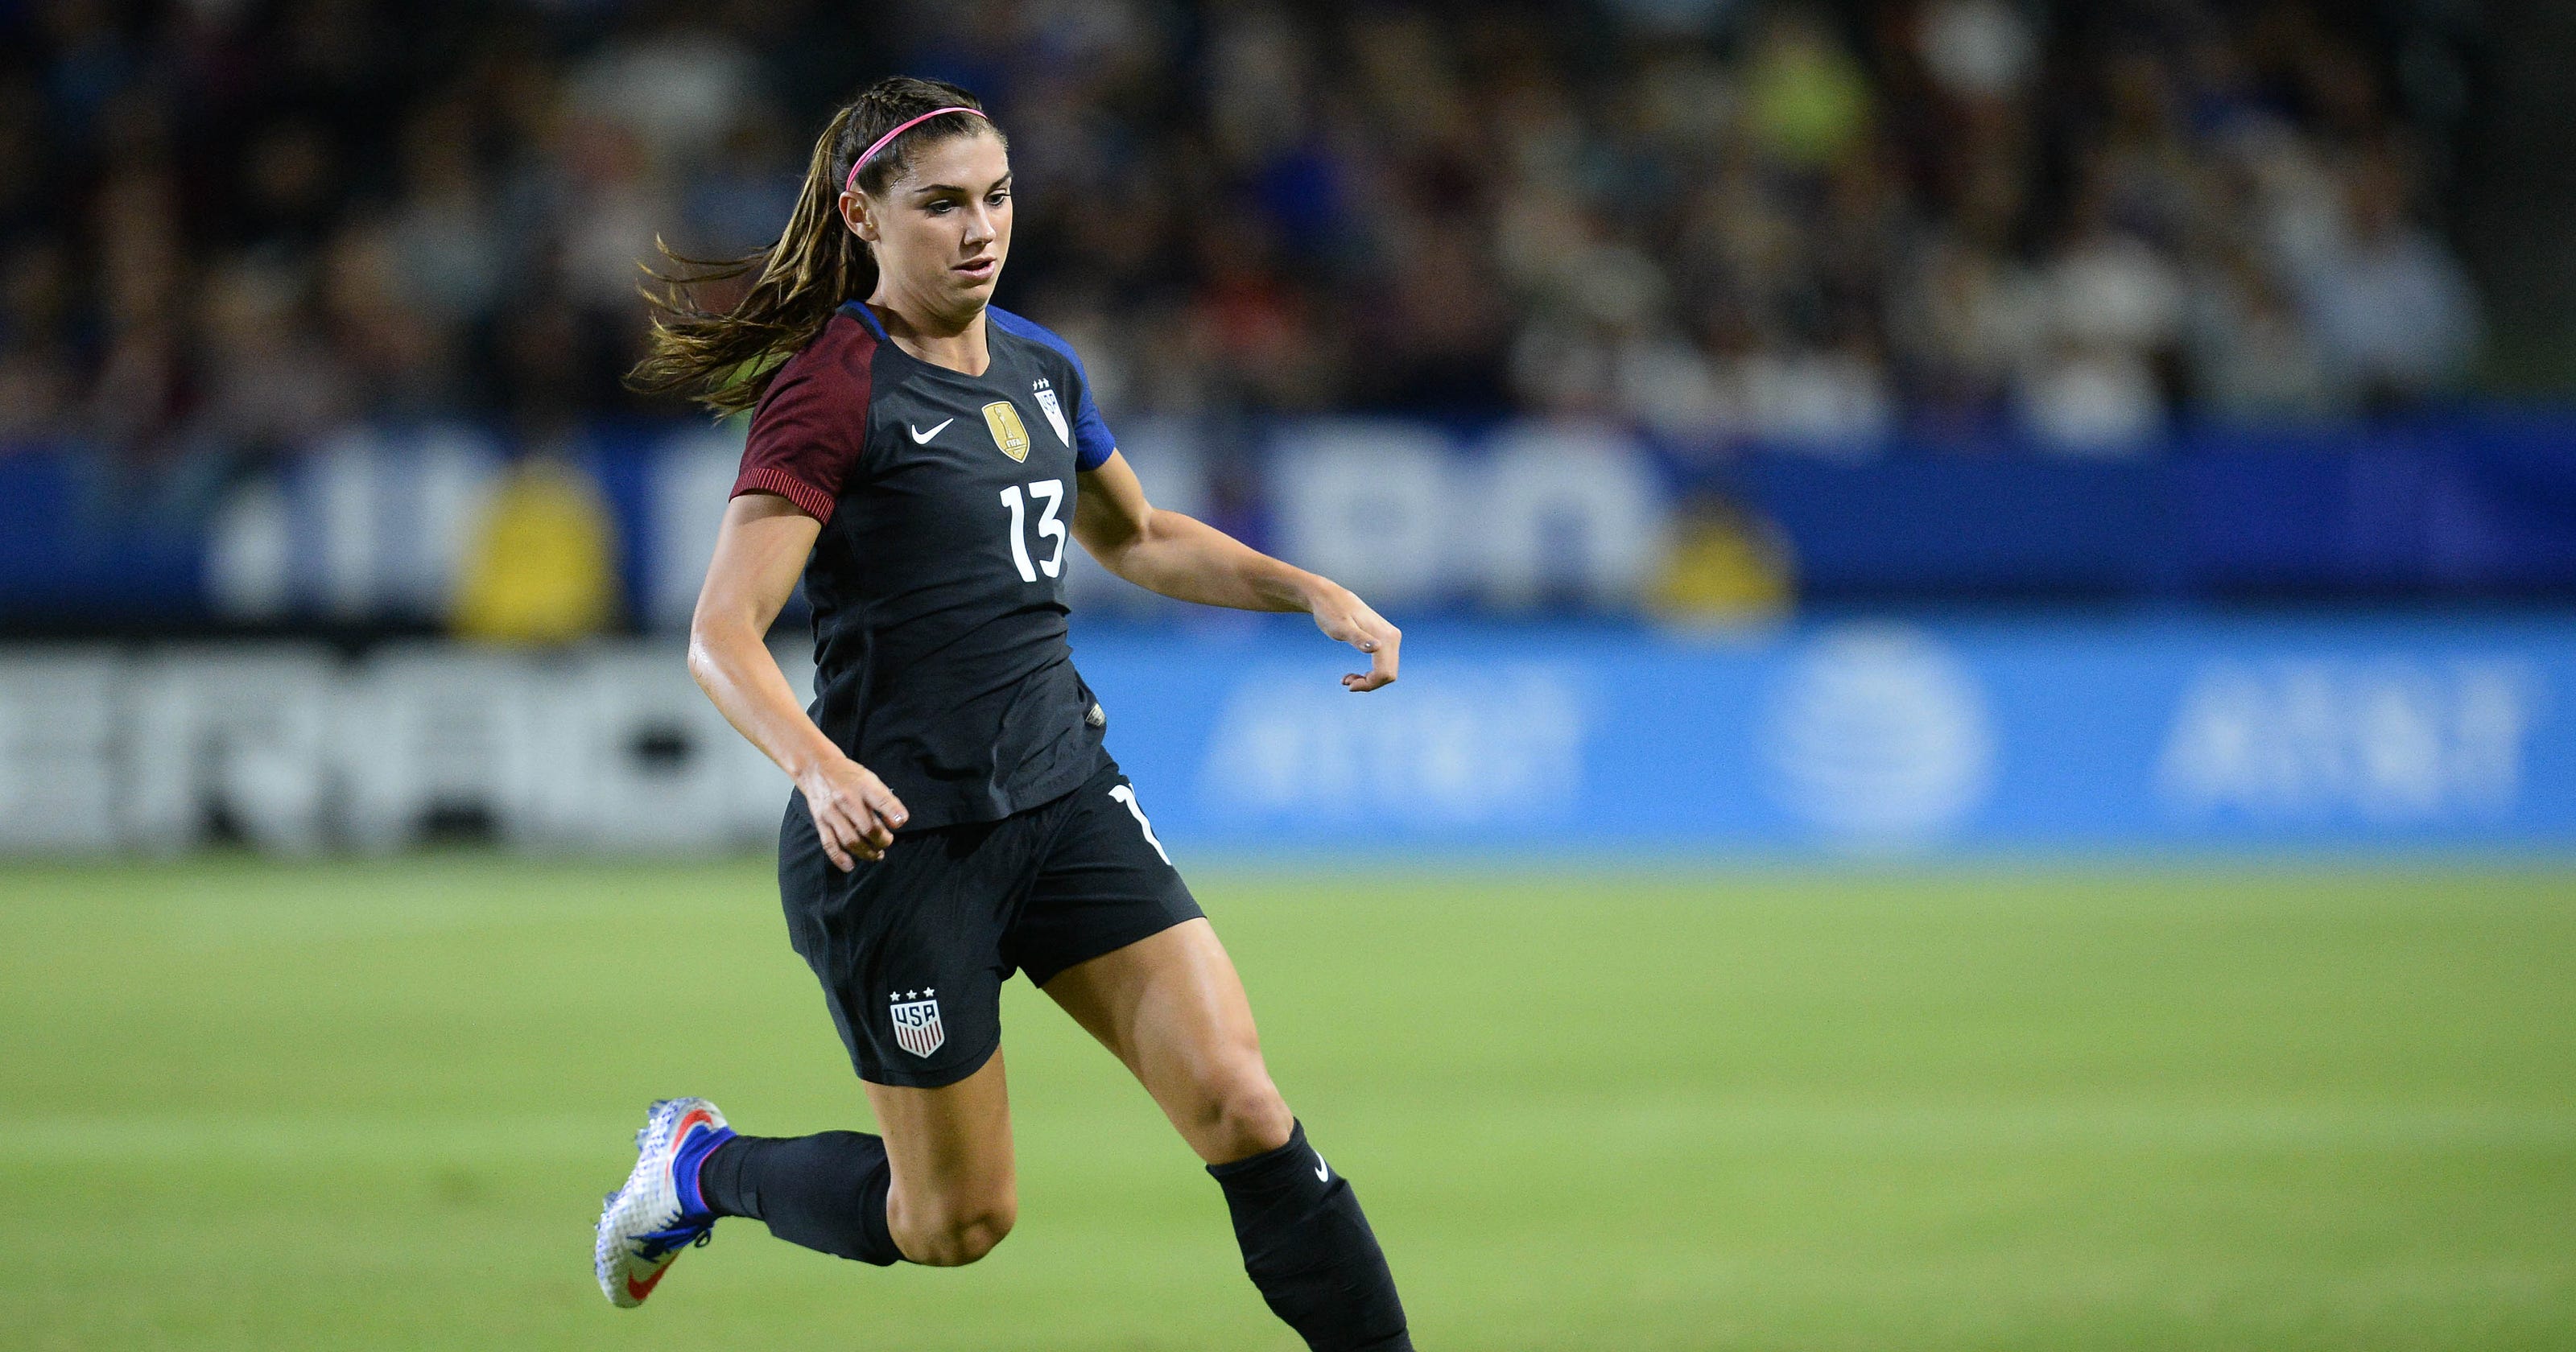 Alex Morgan explains why she wants to play soccer in France